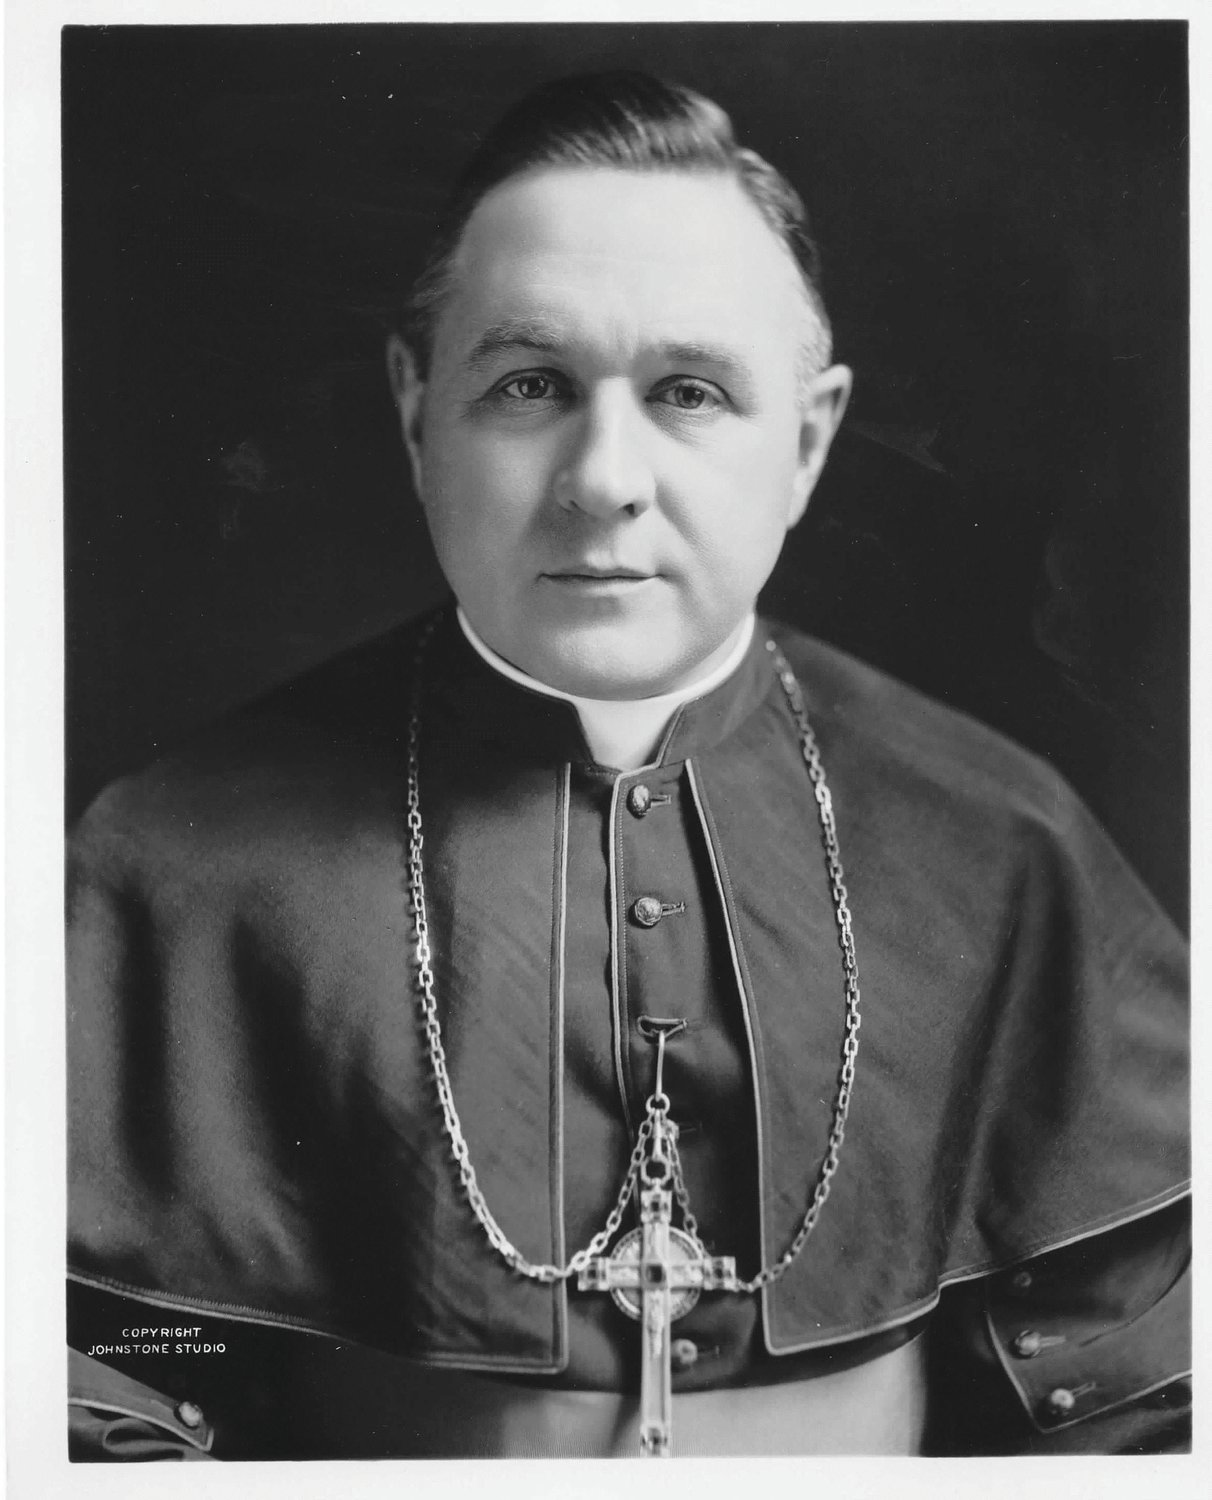 Bishop Francis P. Keough is pictured here in this undated official portrait by Johnstone Studio. The bishop served the Diocese of Providence from 1934-1947.